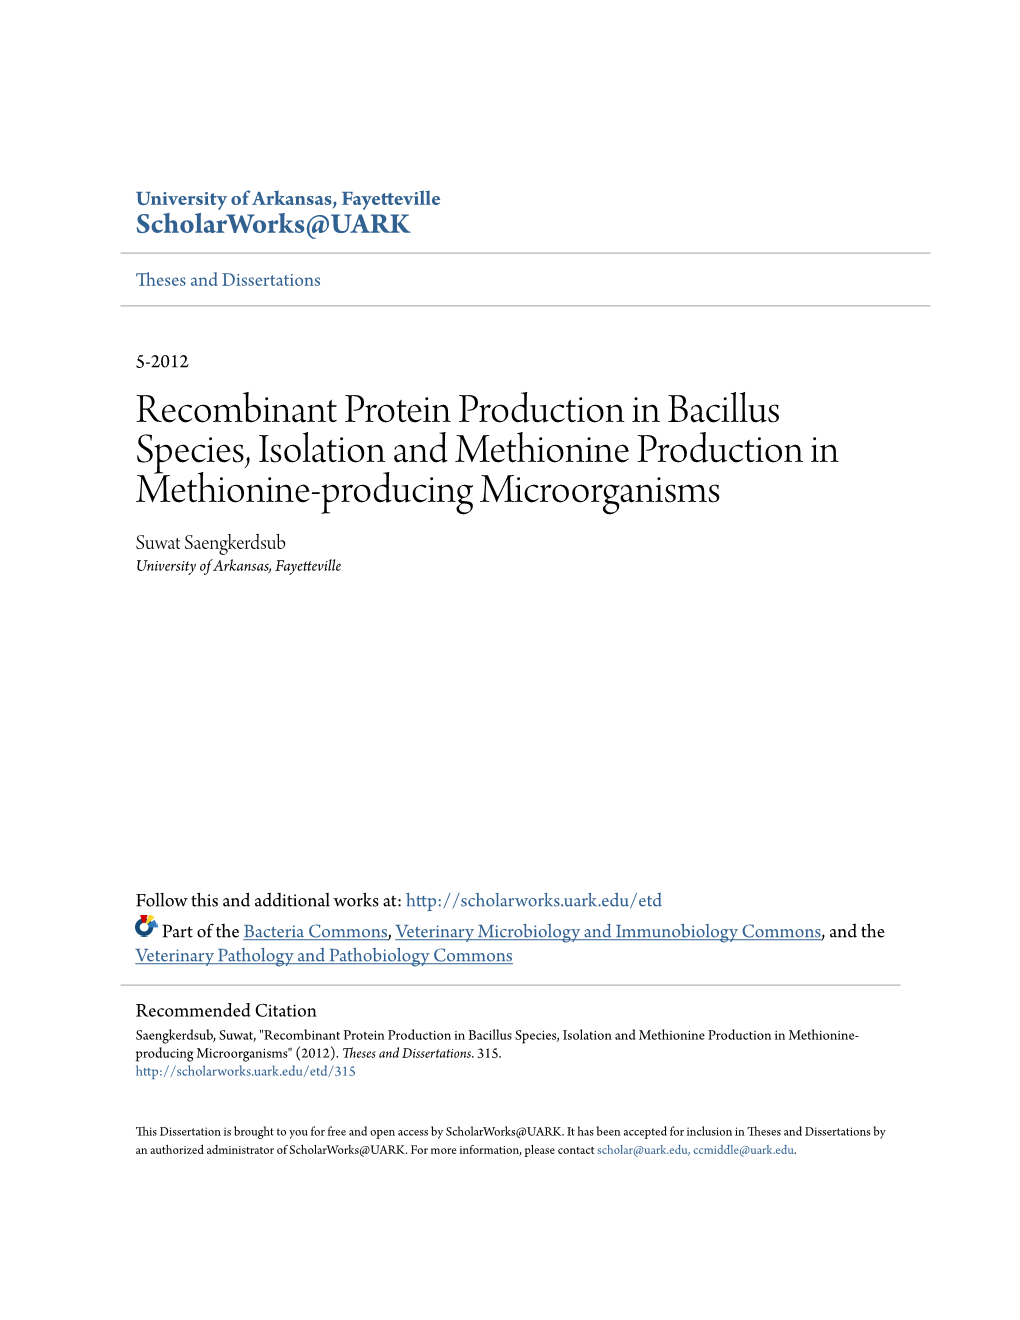 Recombinant Protein Production in Bacillus Species, Isolation And